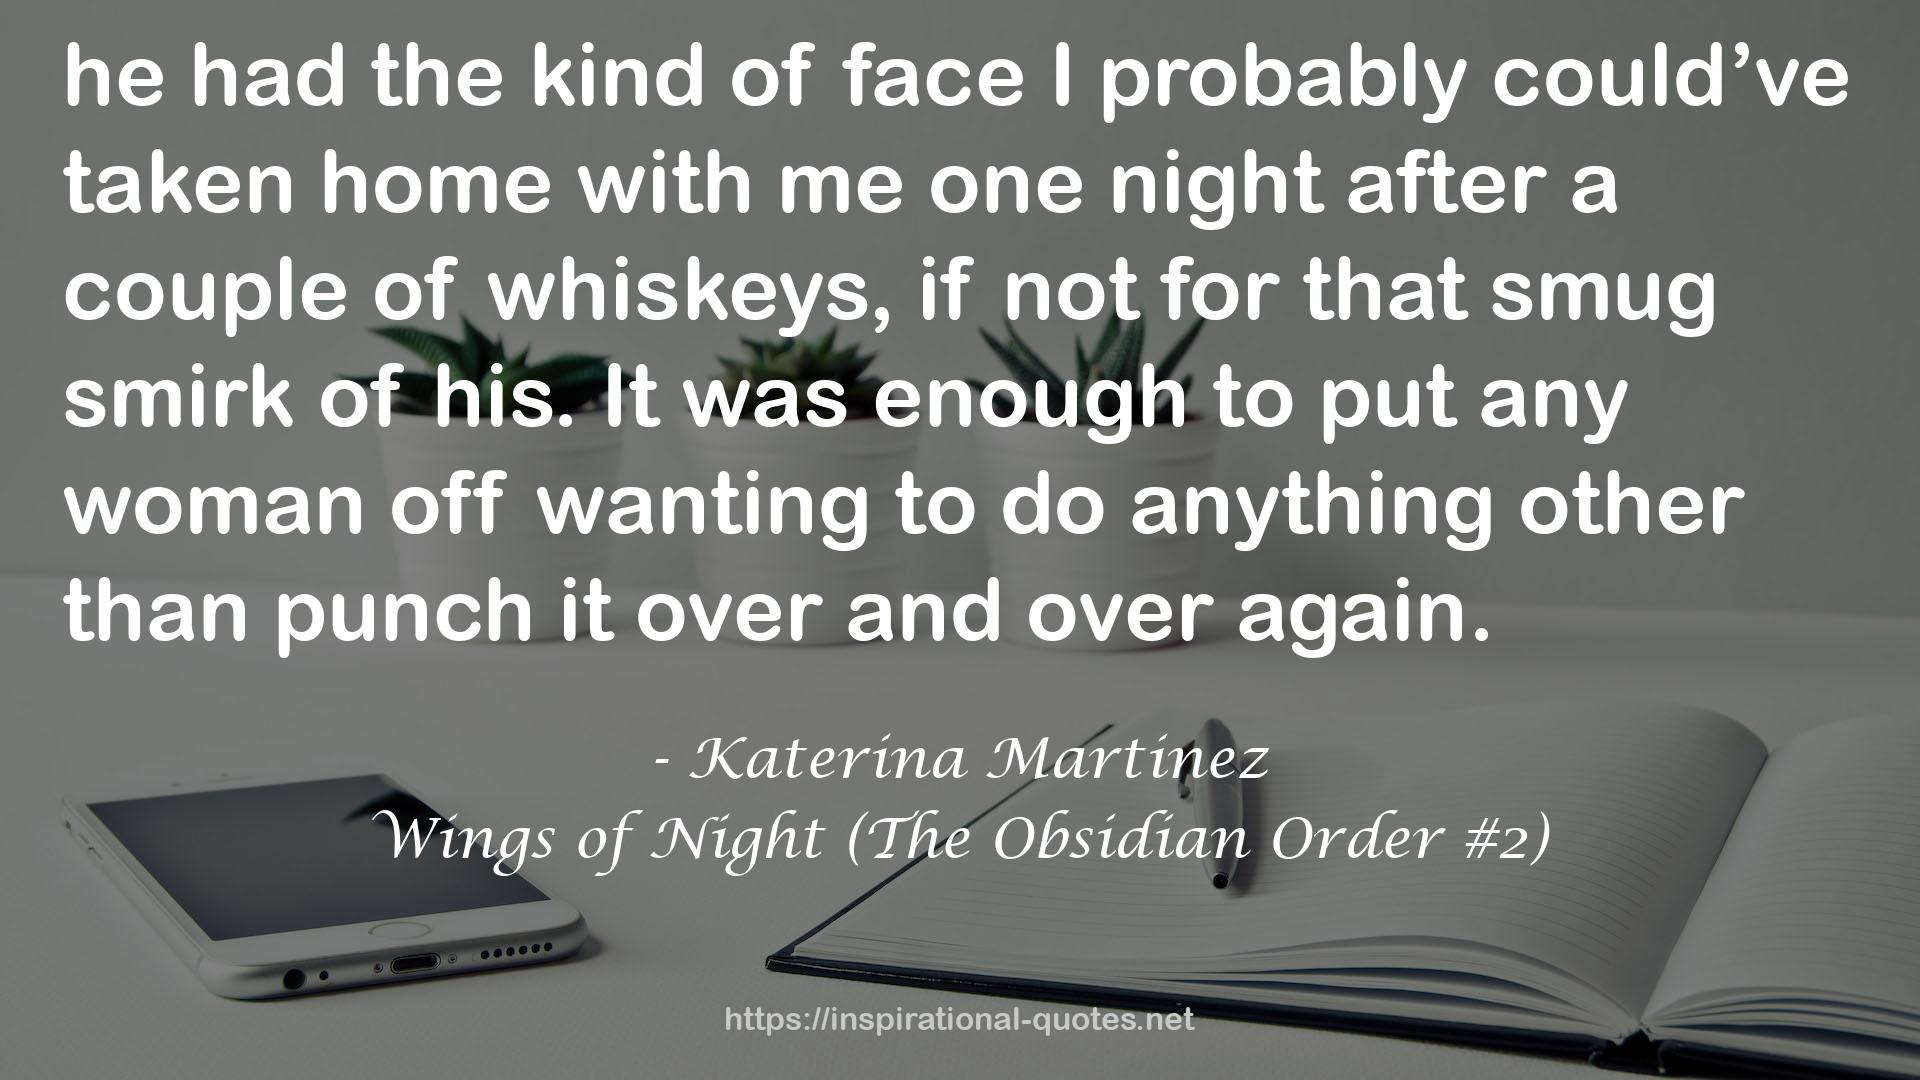 Wings of Night (The Obsidian Order #2) QUOTES